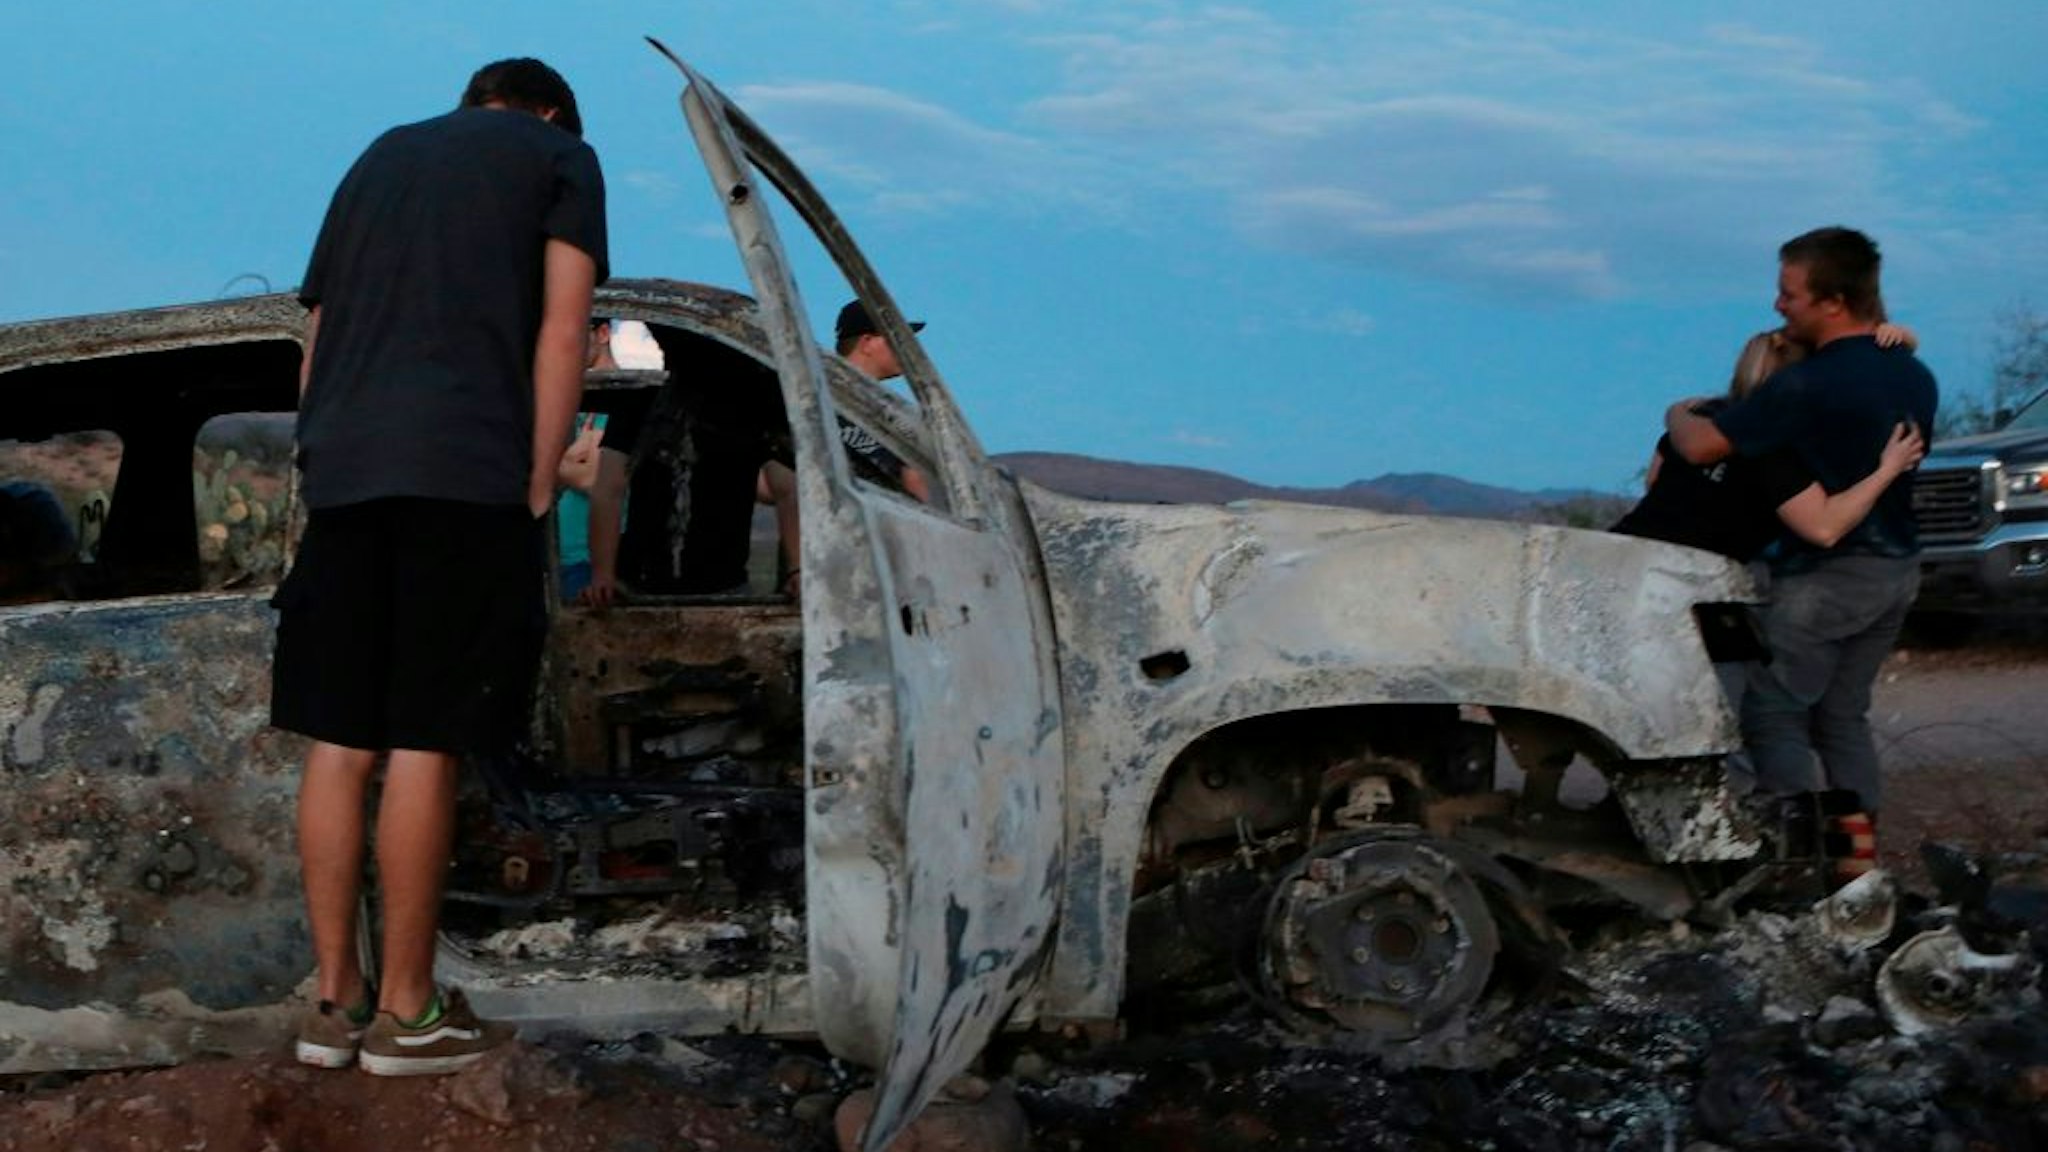 Members of the Lebaron family look at the burned car where part of the nine murdered members of the family were killed and burned during an ambush in Bavispe, Sonora mountains, Mexico, on November 5, 2019.